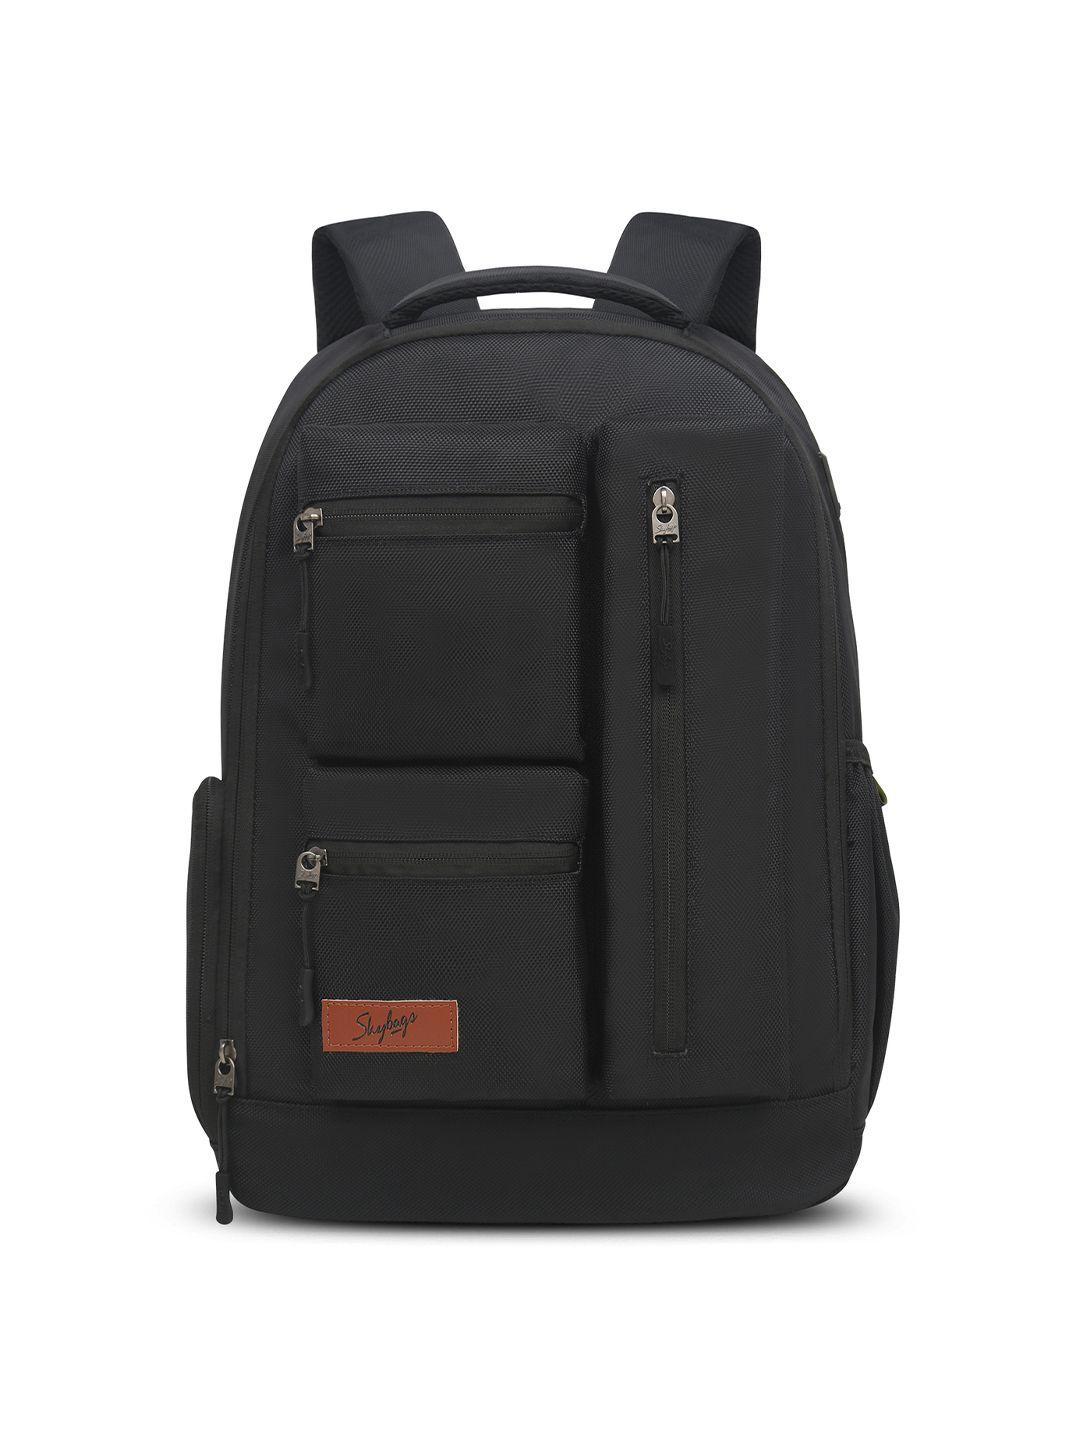 skybags unisex nexus laptop backpack with usb charging port